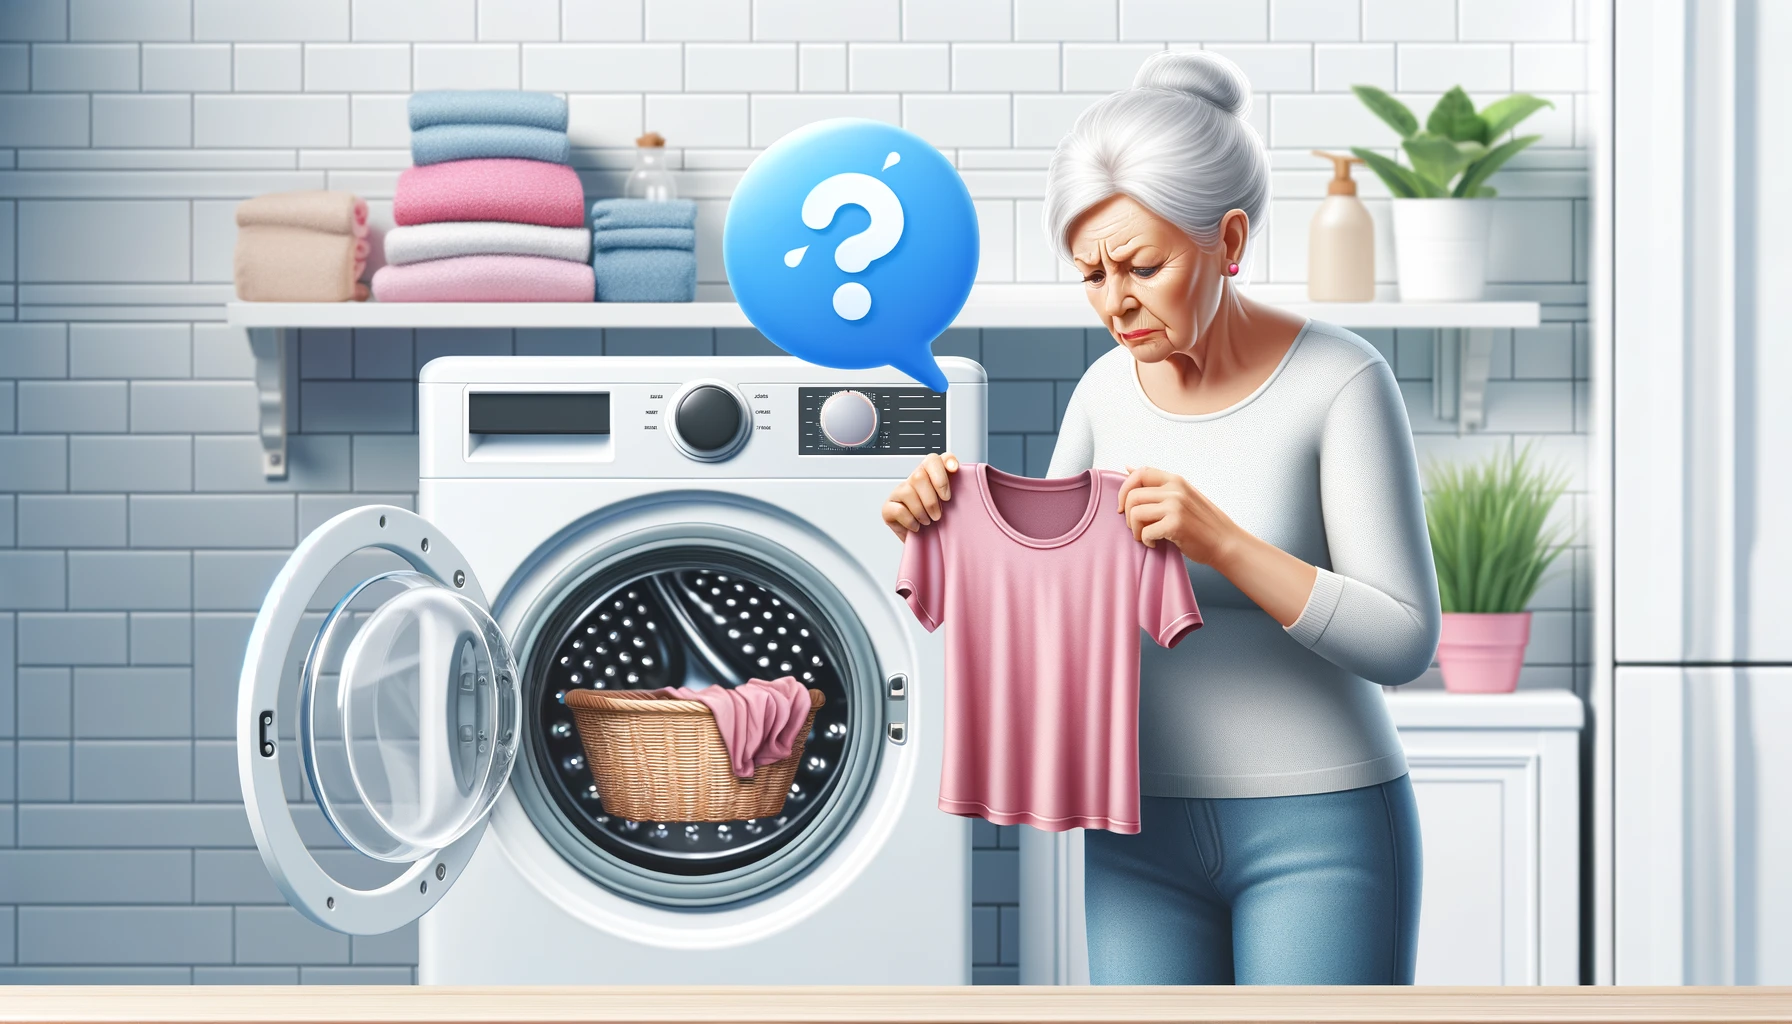 An elderly woman looks concerned at a shrunken pink t-shirt after washing.